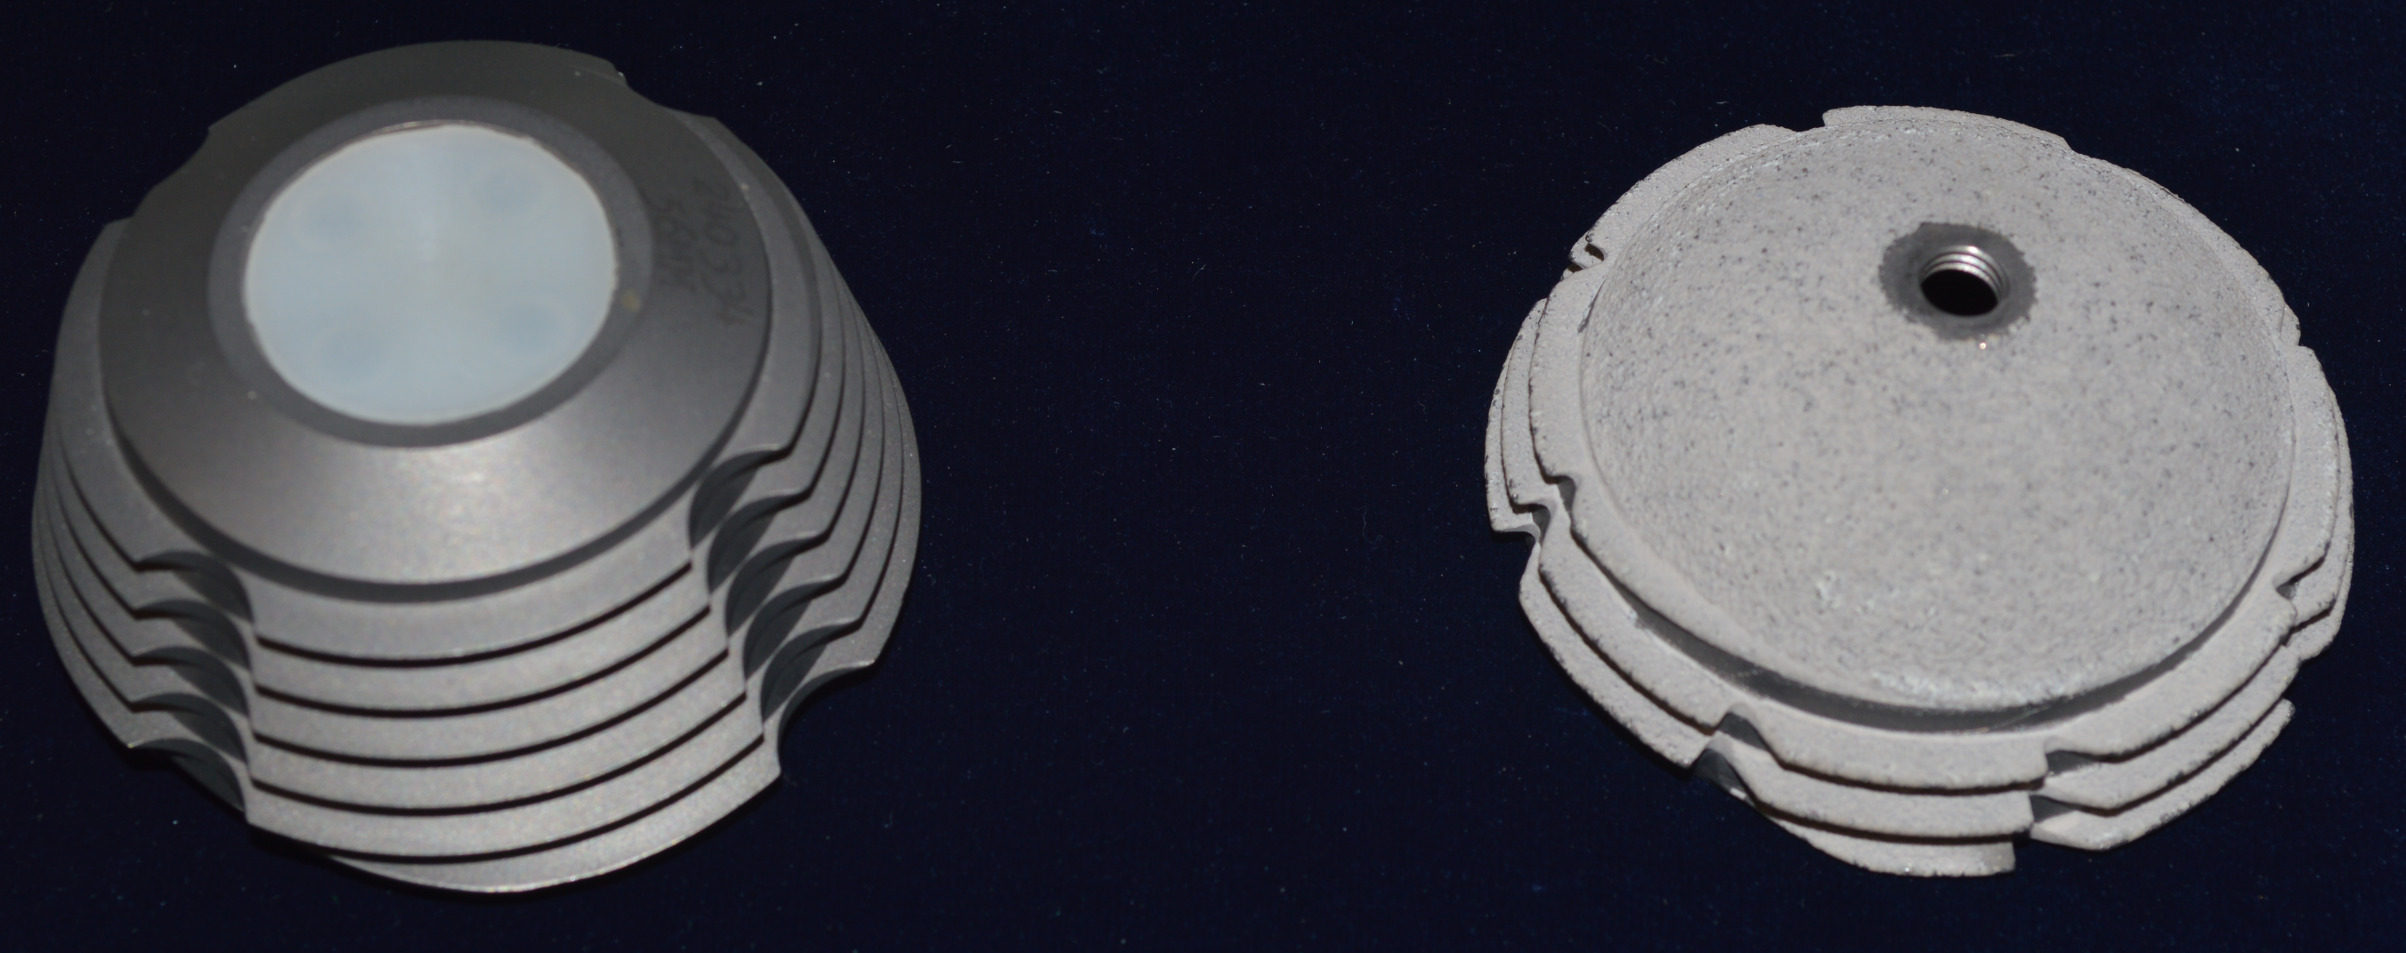 Fig. 2 
          Photograph of the first- (left) and second- (right) generation T-Tap and T-Tap ST acetabular components. The second-generation T-Tap is a fully porous coated hemisphere with threads.
        